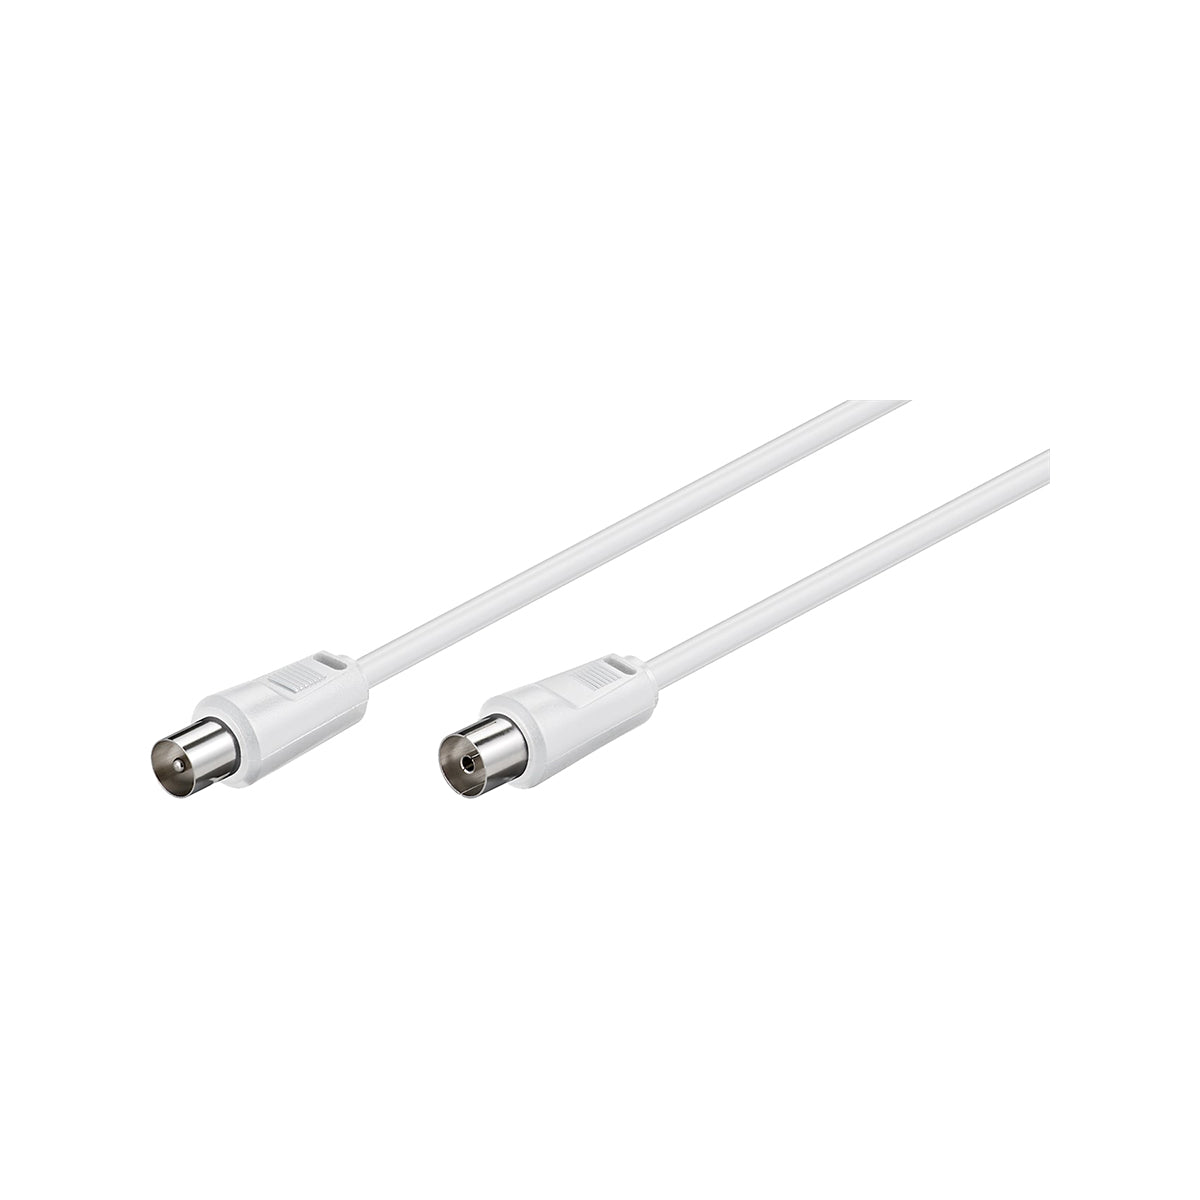 Goobay Antenna Cable (M/F) 1.5M for TV - White